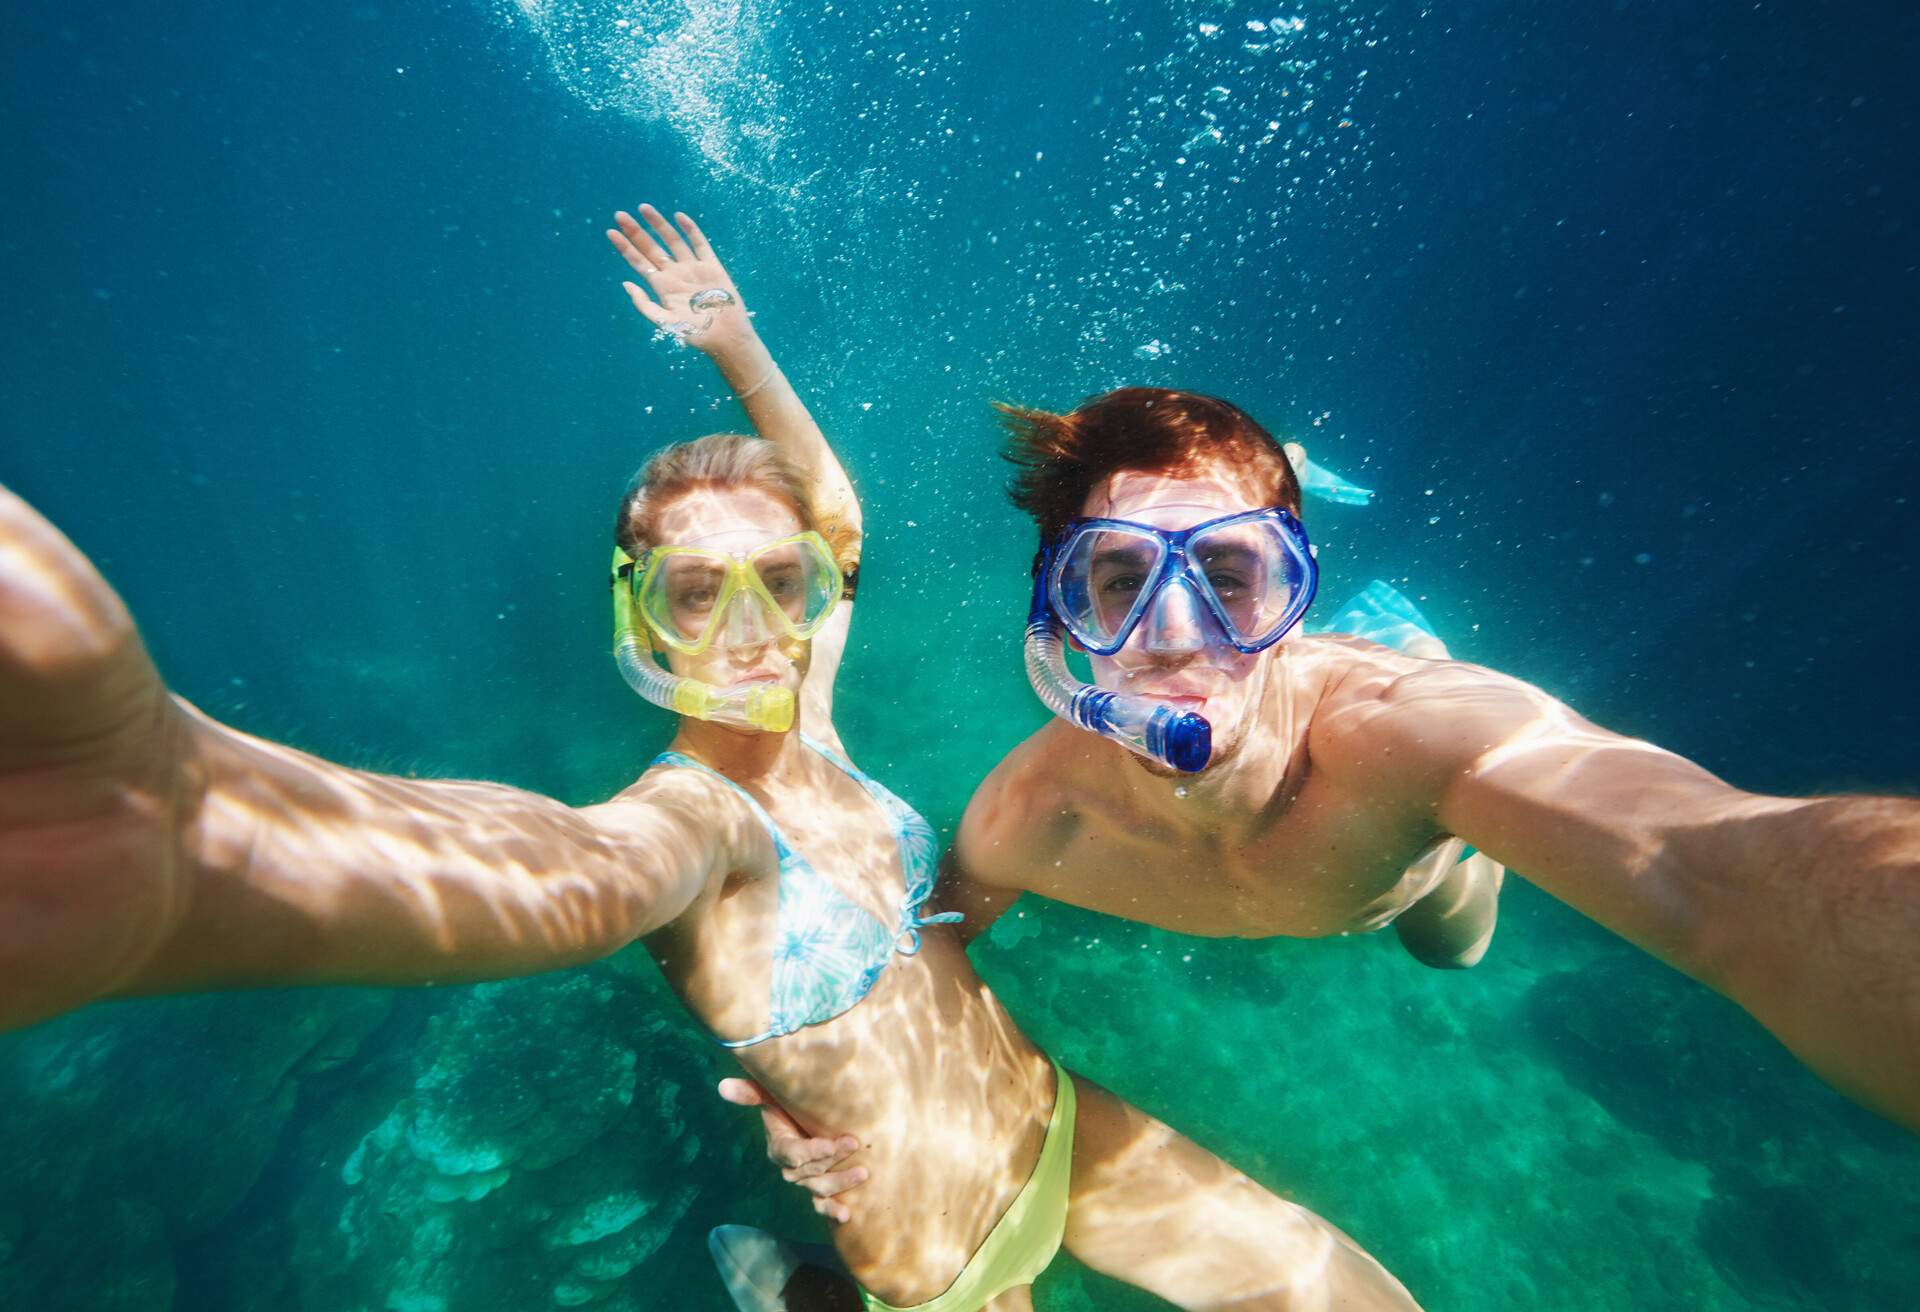 THEME_SUMMER_SNORKELING_COUPLE_UNDERWATER_GettyImages-521080032_Universal